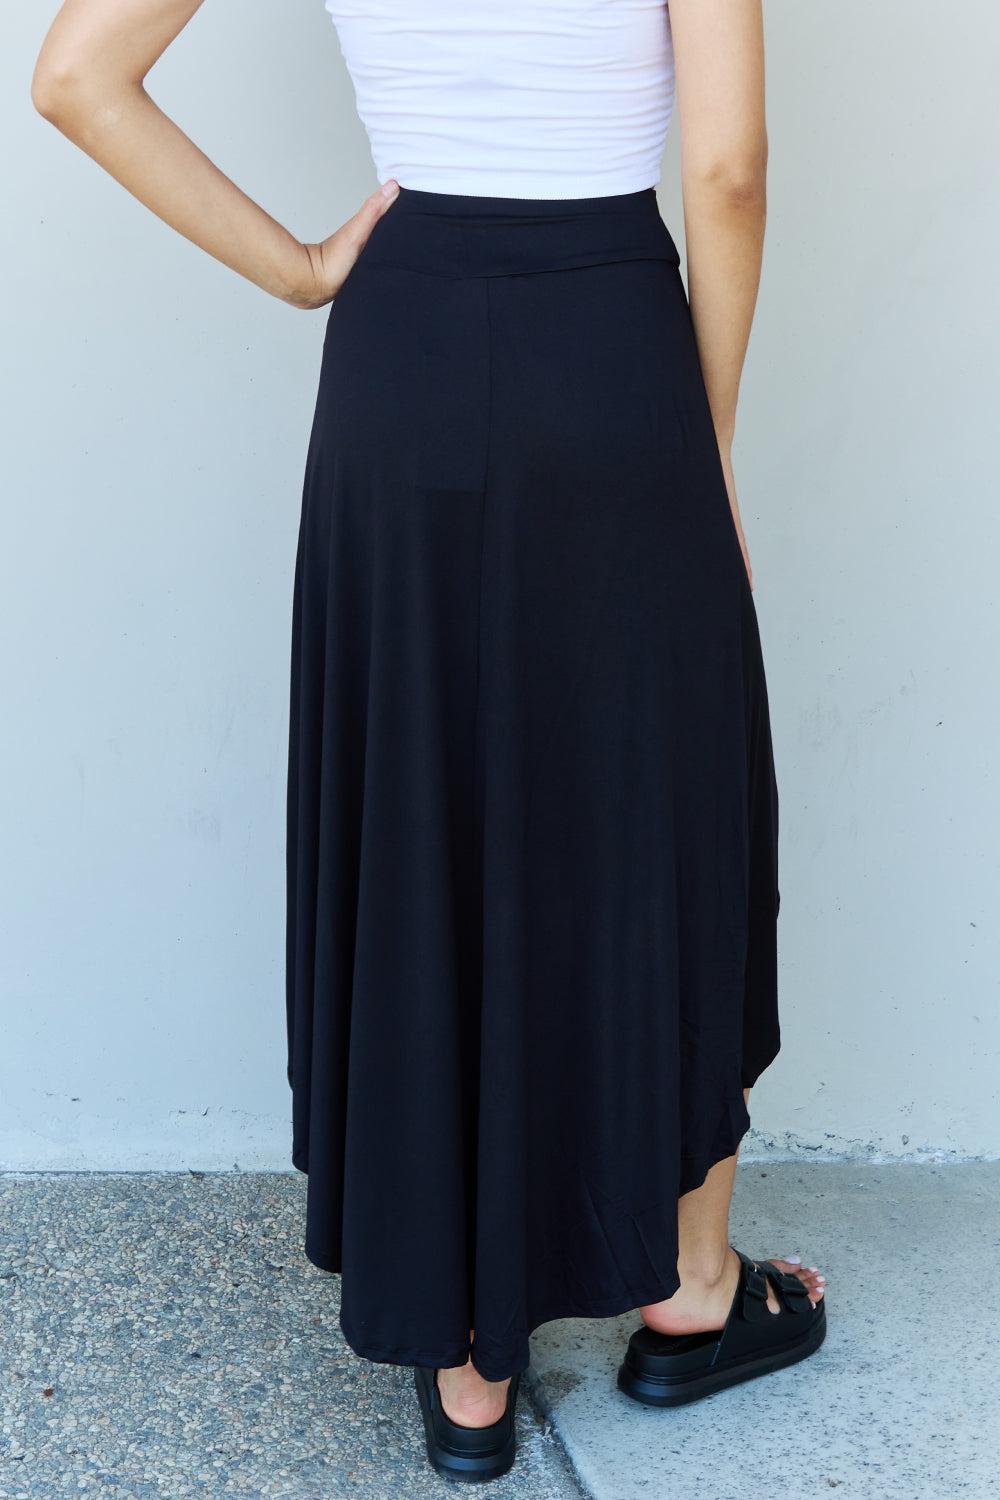 Ninexis First Choice High Waisted Flare Maxi Skirt in Black BLUE ZONE PLANET